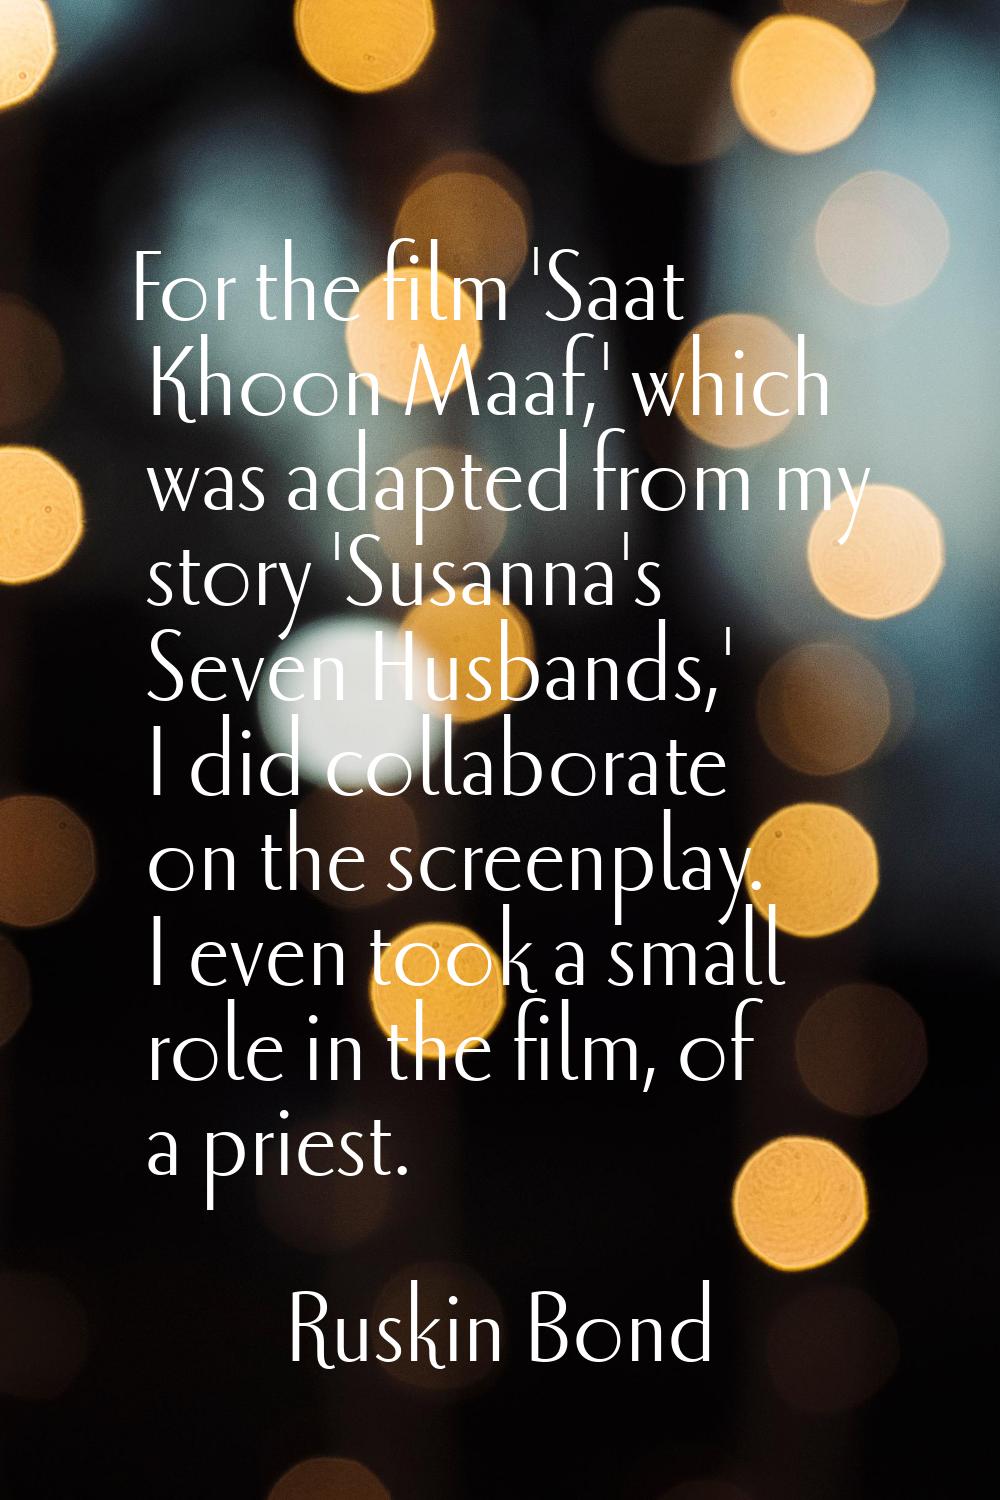 For the film 'Saat Khoon Maaf,' which was adapted from my story 'Susanna's Seven Husbands,' I did c